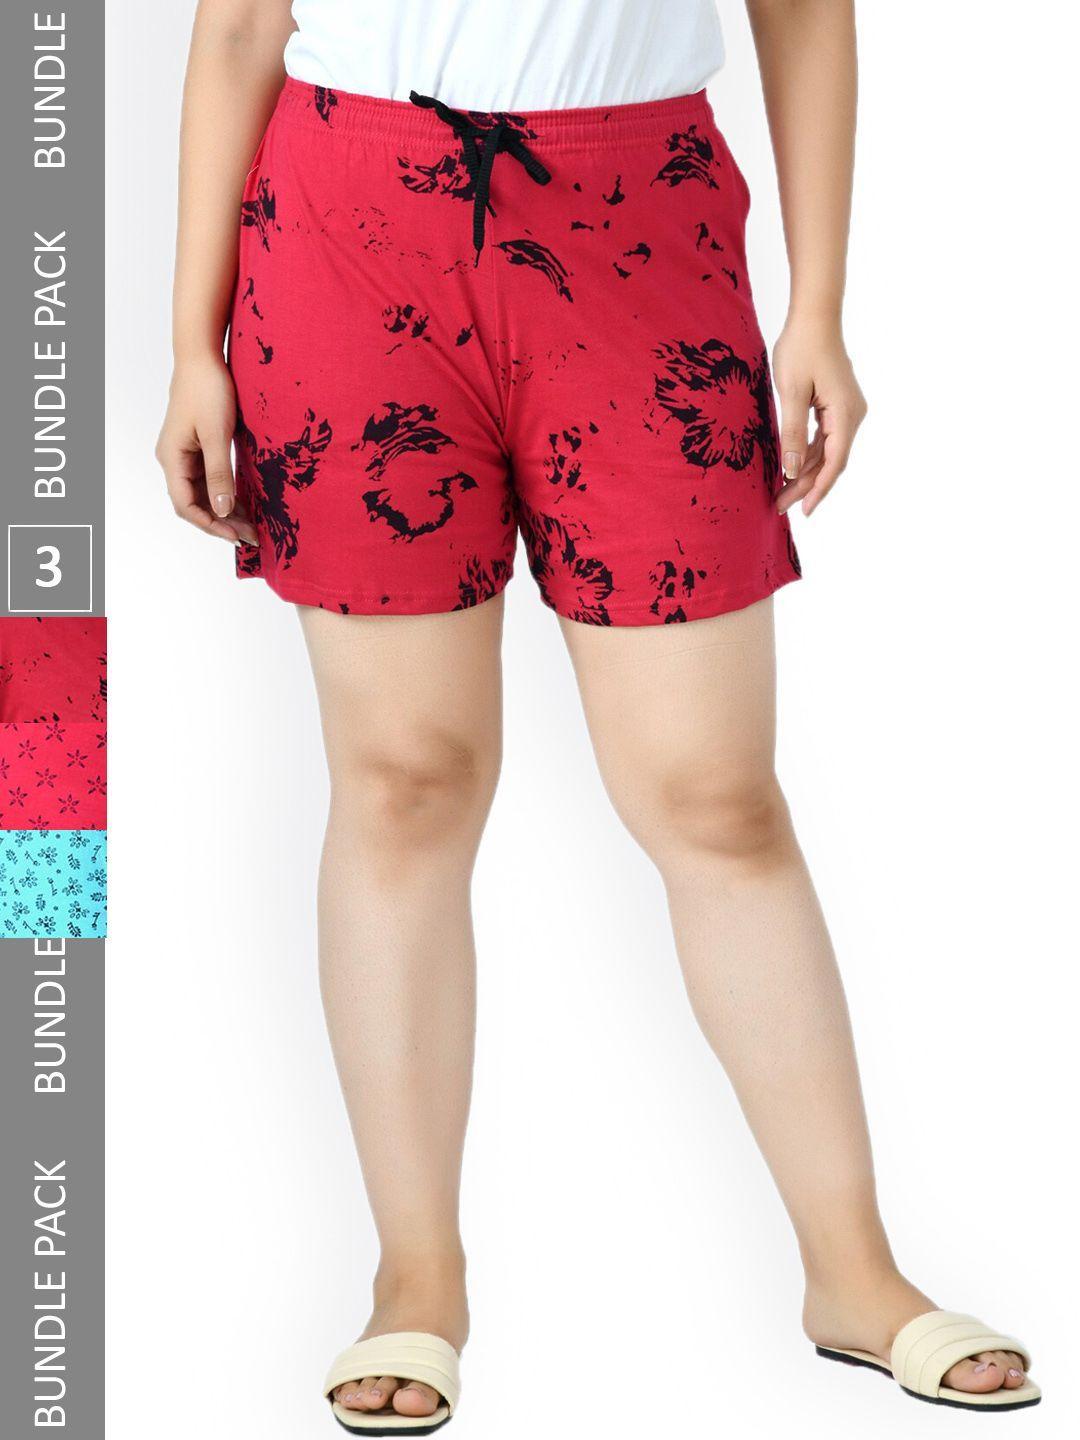 indiweaves-girls-pack-of-3-printed-high-rise-pure-cotton-shorts